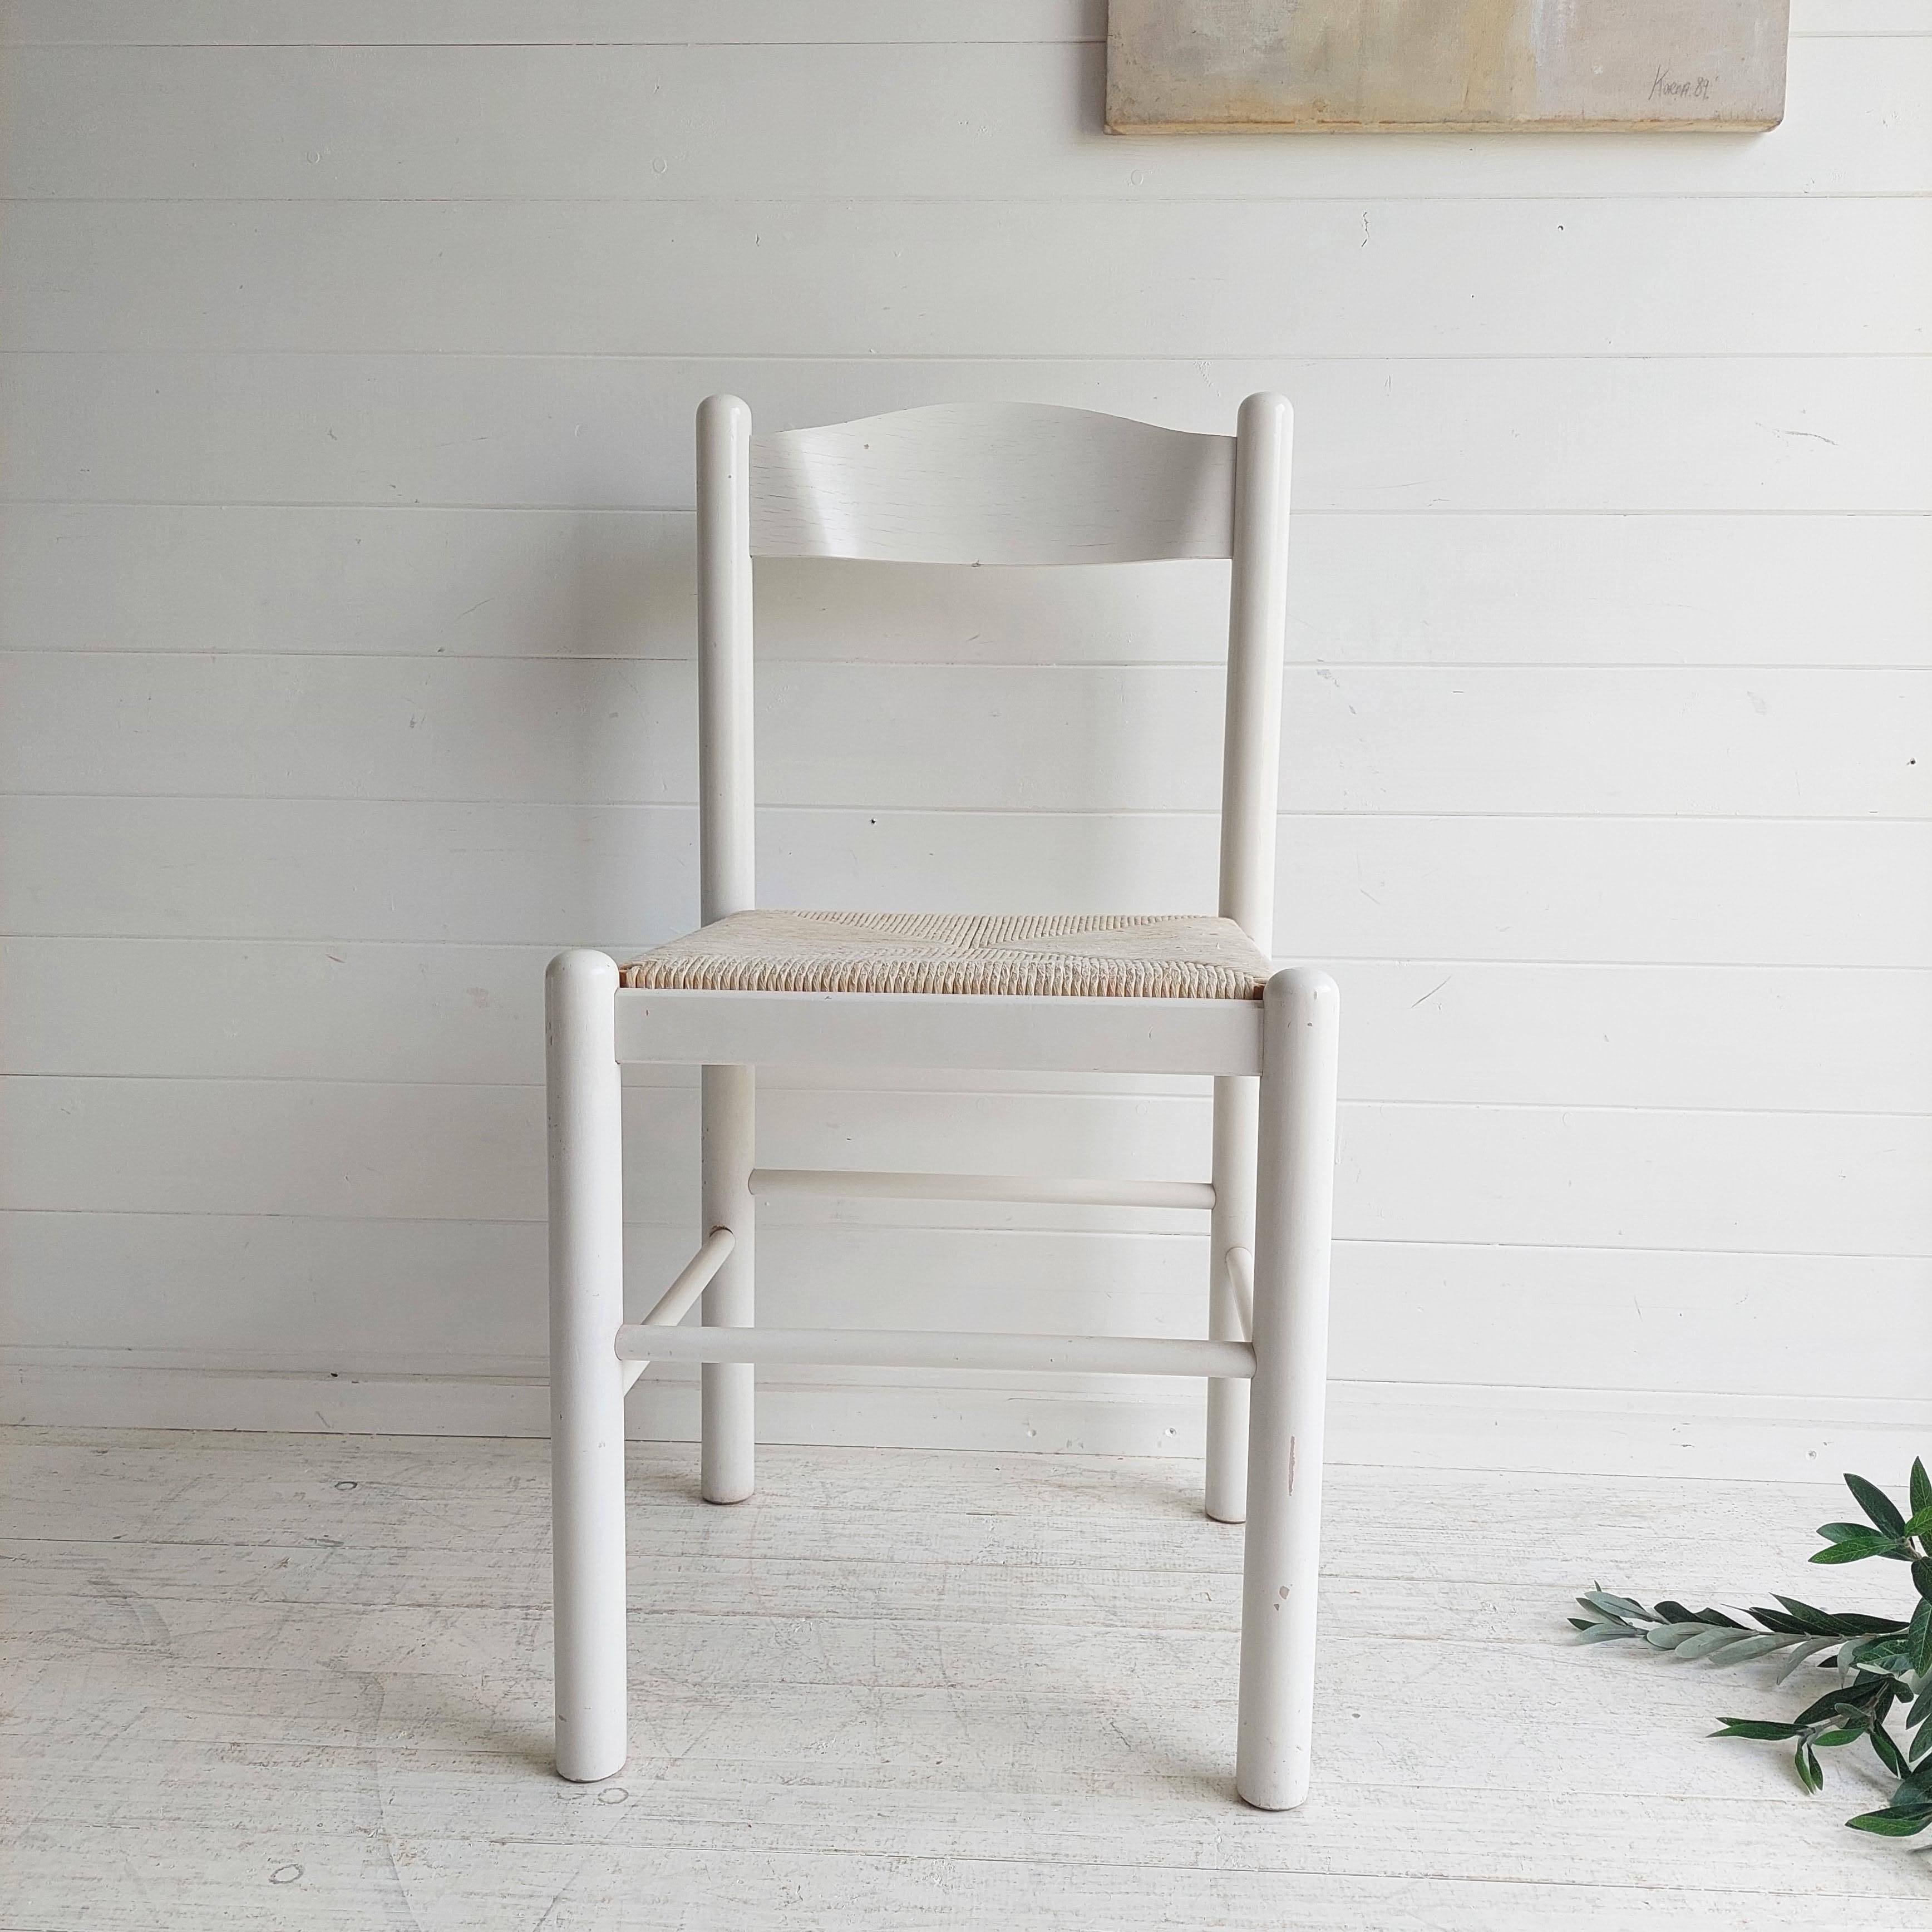 Vintage Midcentury Modern Italian Design Dining Chair
Most probably Made in Italy 1970/80’s. 

White laquered wooden frame with rush woven seat. 
Constructed from solid beech frames and rush paper cord pattern seat pads.
High quality made solid